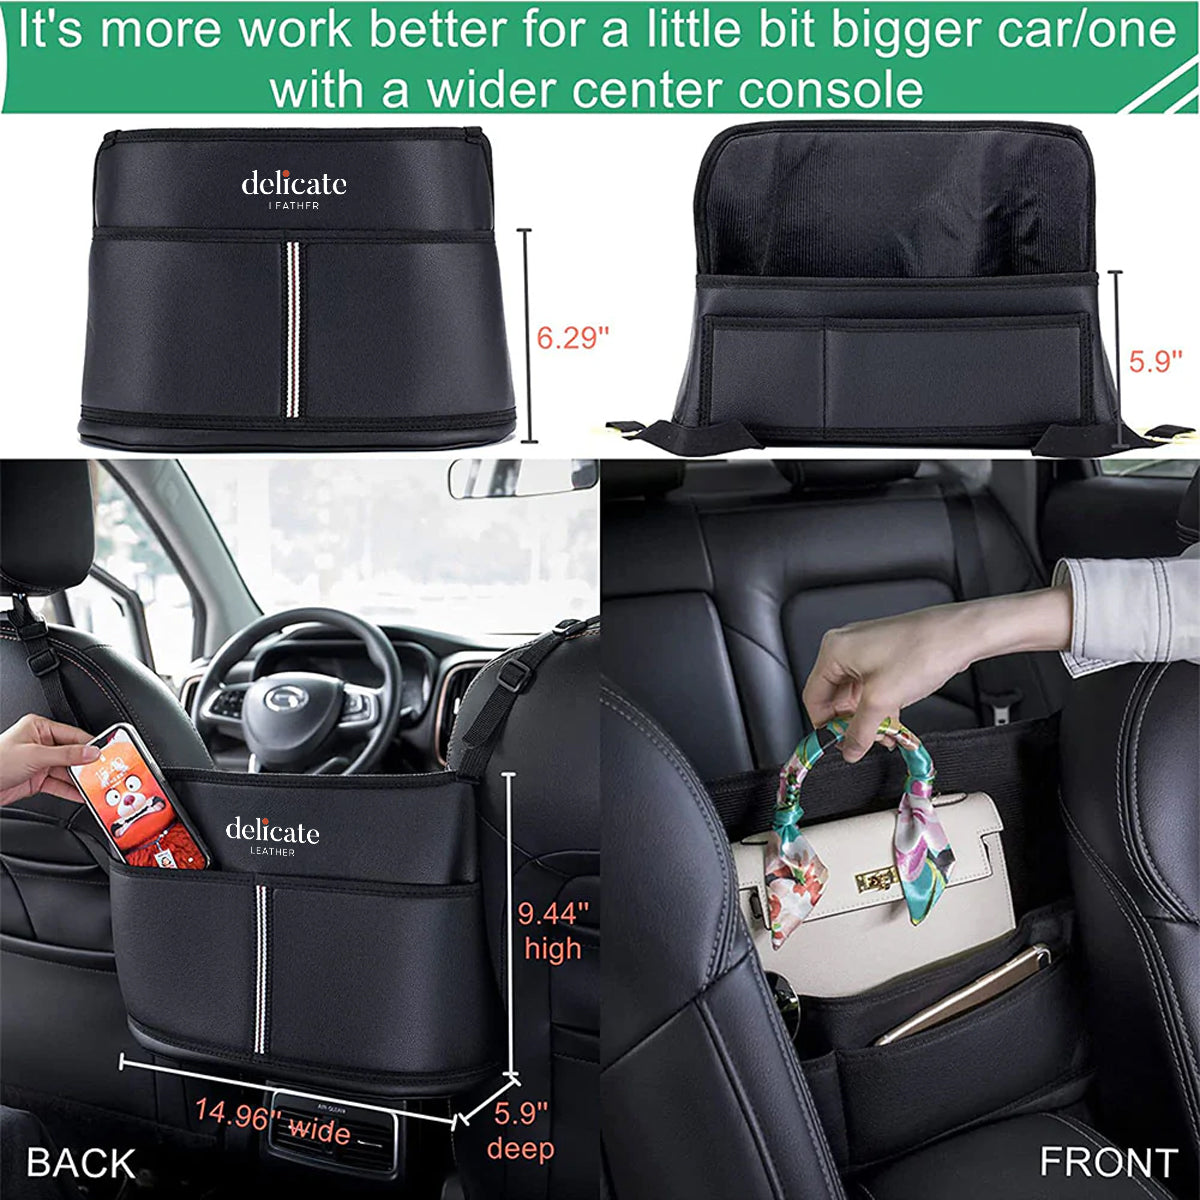 Delicate Leather Car Purse Holder for Car Handbag Holder Between Seats Premium PU Leather, Custom Fit For Your Cars, Auto Driver Or Passenger Accessories Organizer, Hanging Car Purse Storage Pocket Back Seat Pet Barrier PE11991 - Delicate Leather